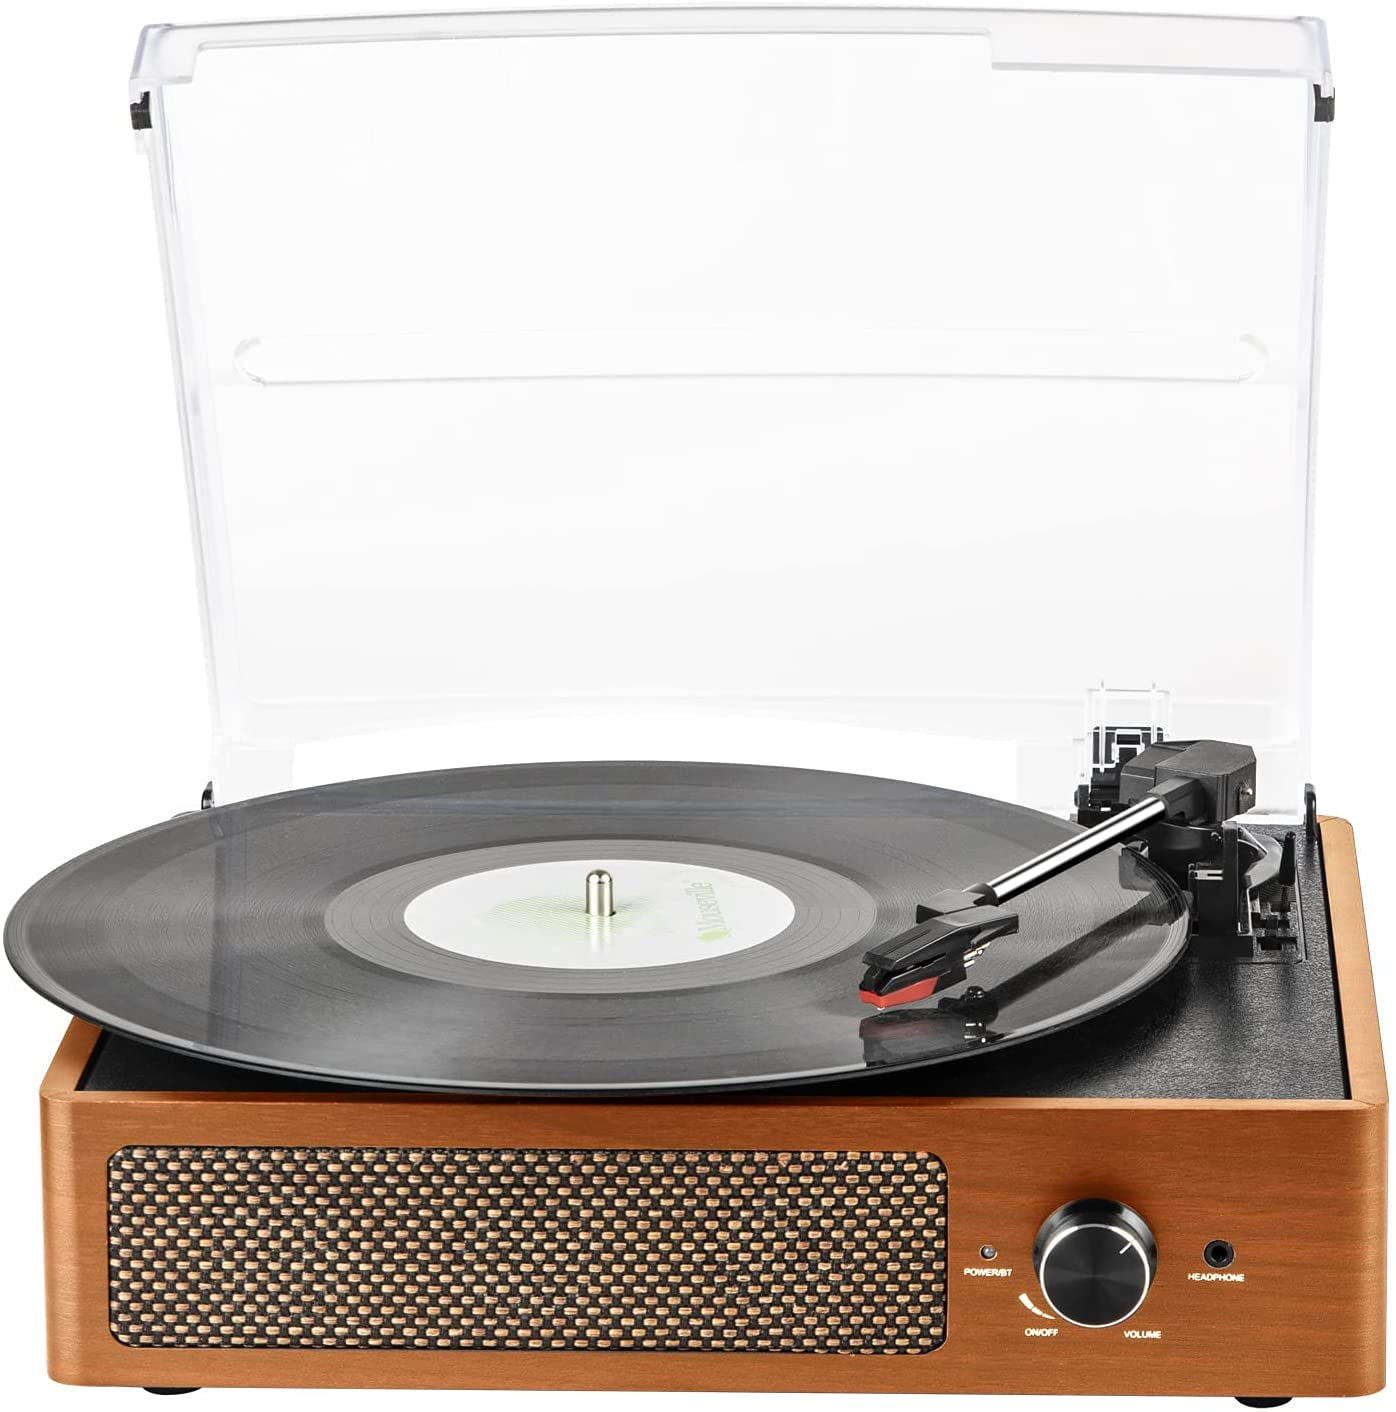 Record Player Vinyl Turntable with Built-in Stereo Speakers Wireless in & Out USB Direct Vinyl to MP3 Recording Professional LP Phonograph Automatic Vintage Solid Record Player with Retro Wood Design 